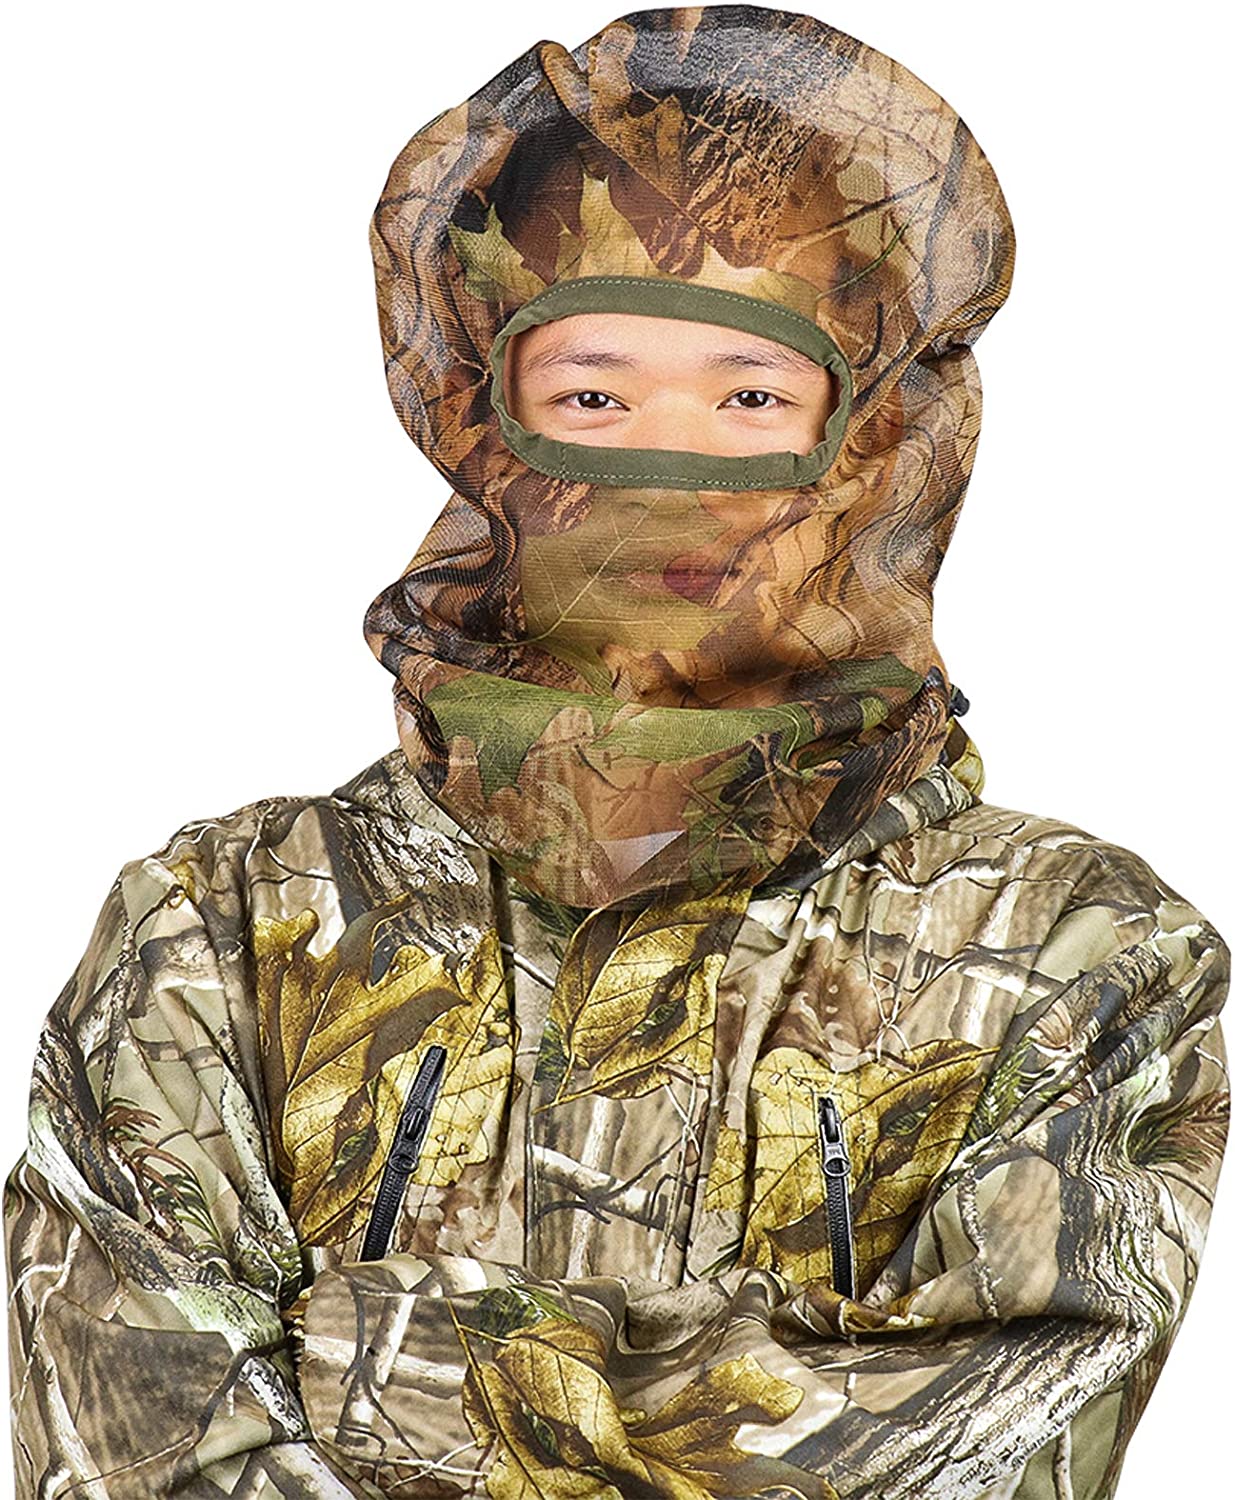 Feyachi Full Camo Face Mask for Concealment Bowhunting Duck Turkey Hunting Face Mask -Camouflage Face Mask for Hunting-2 Pieces